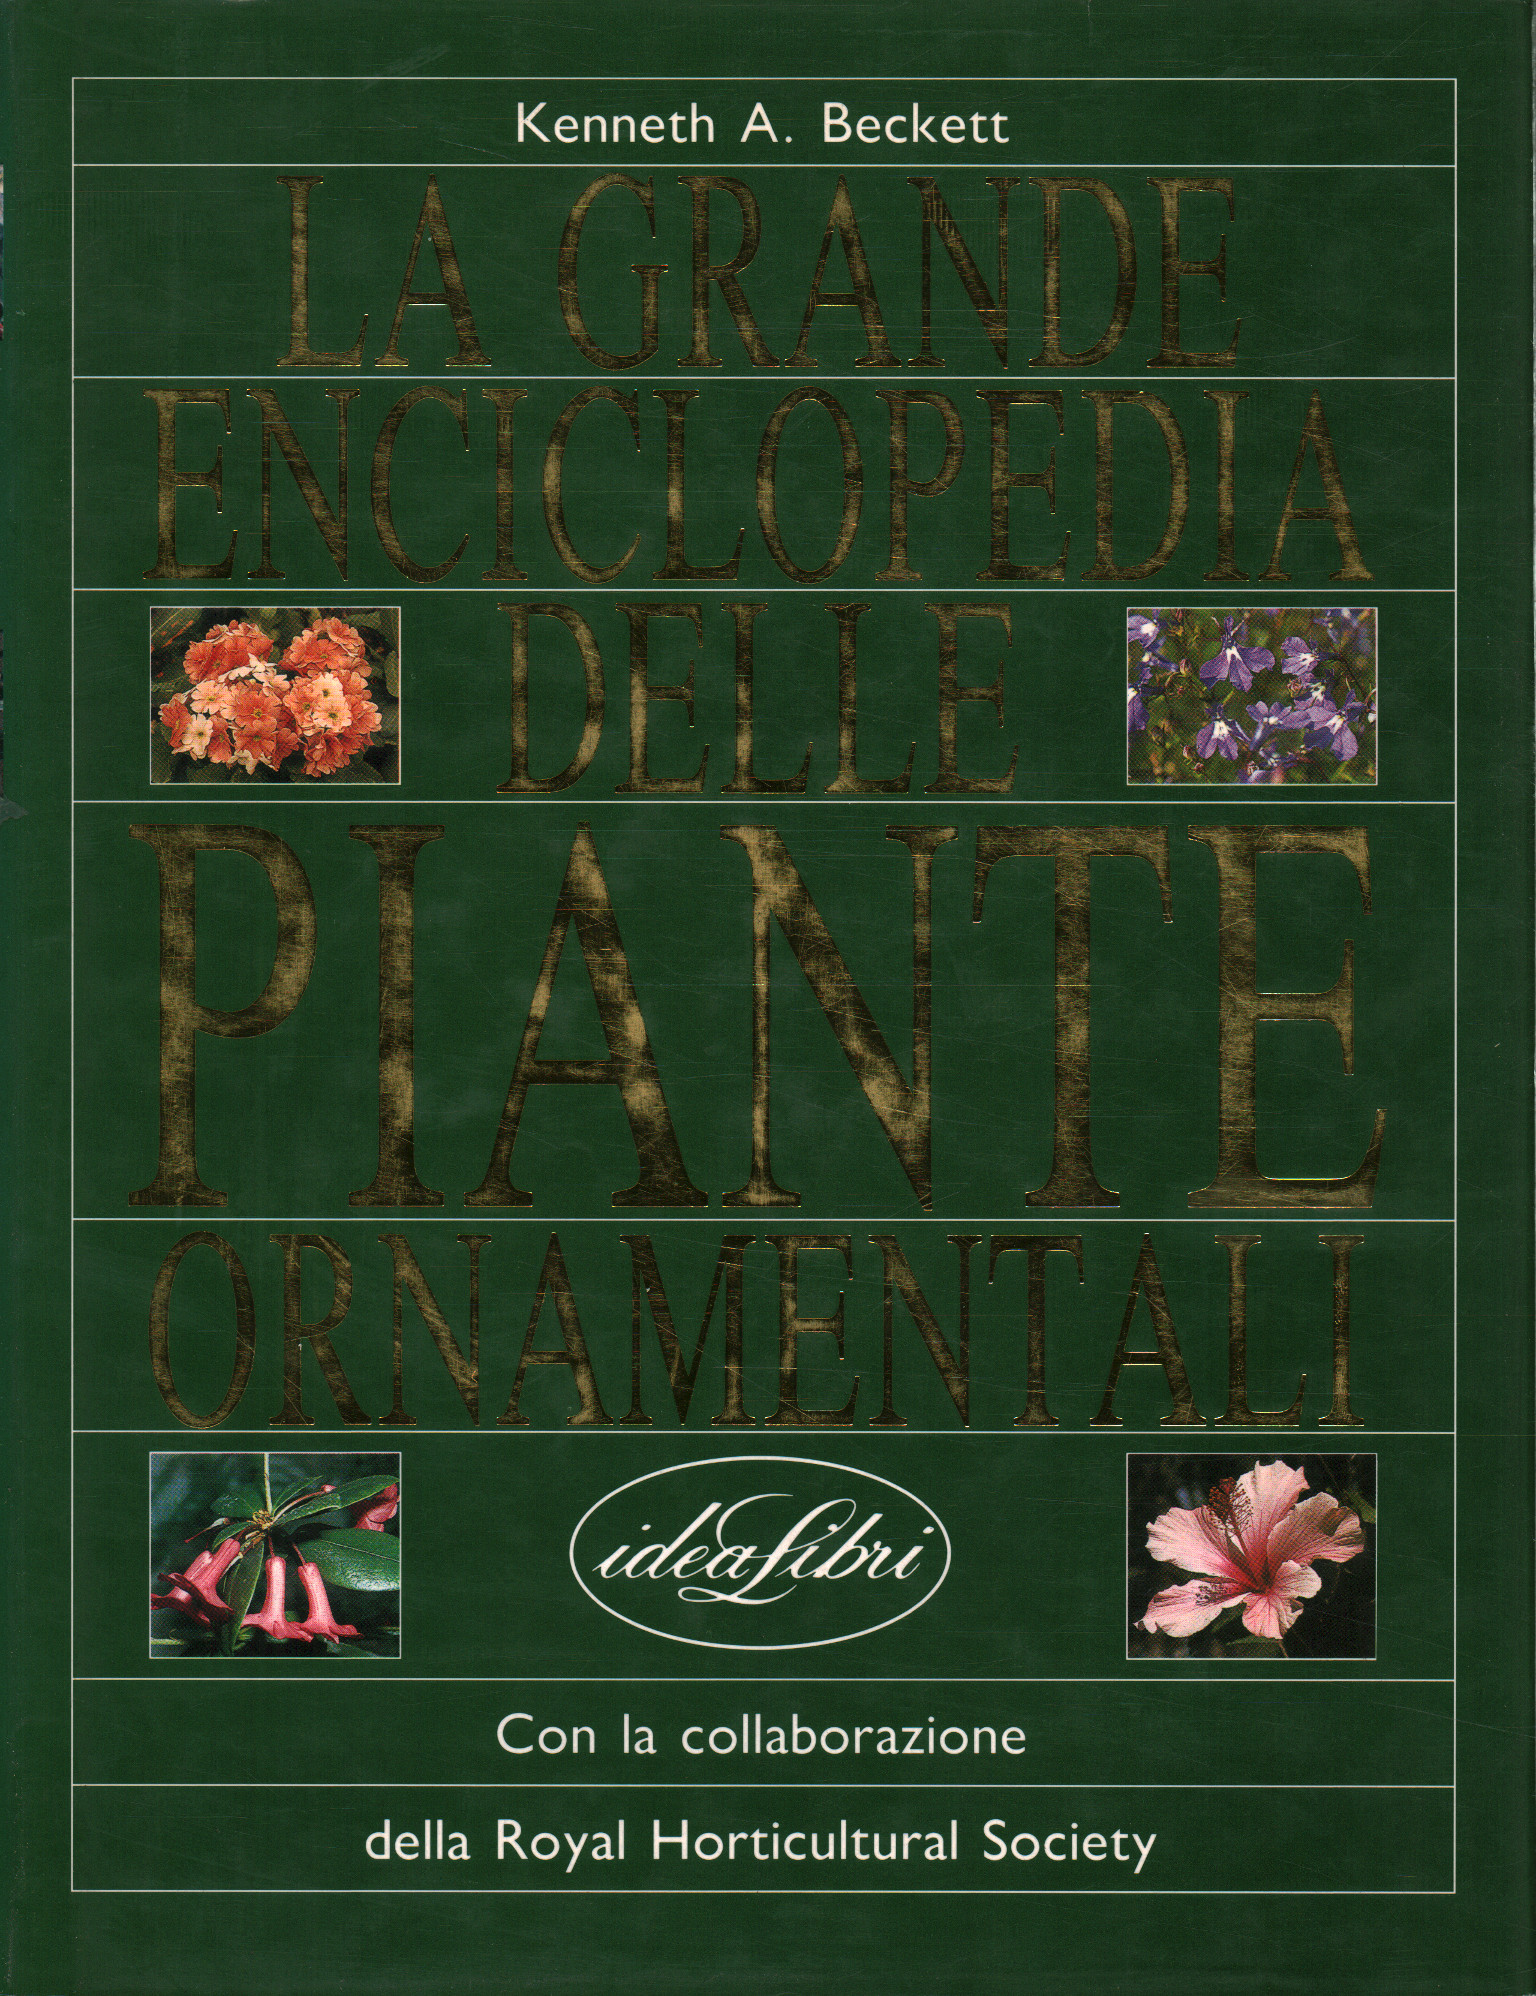 The great encyclopedia of plants adorns